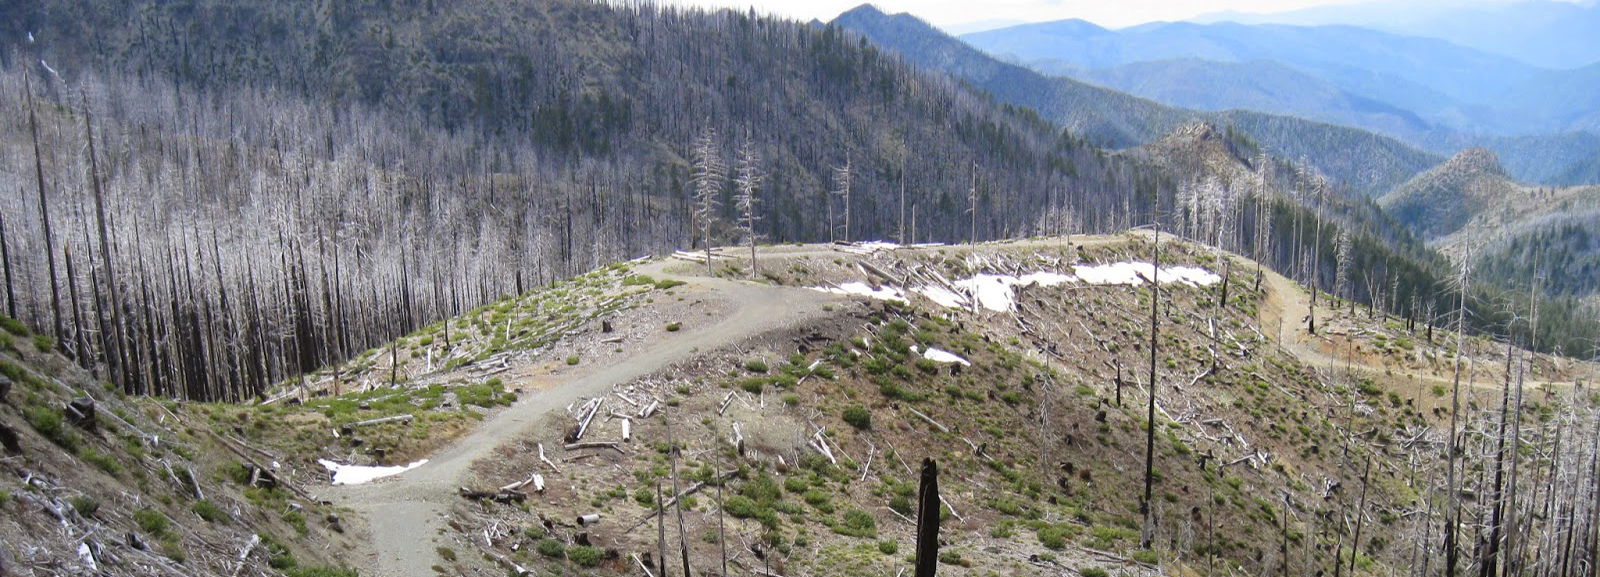 Stopping Post-Fire Clear-cuts in the Columbia Gorge